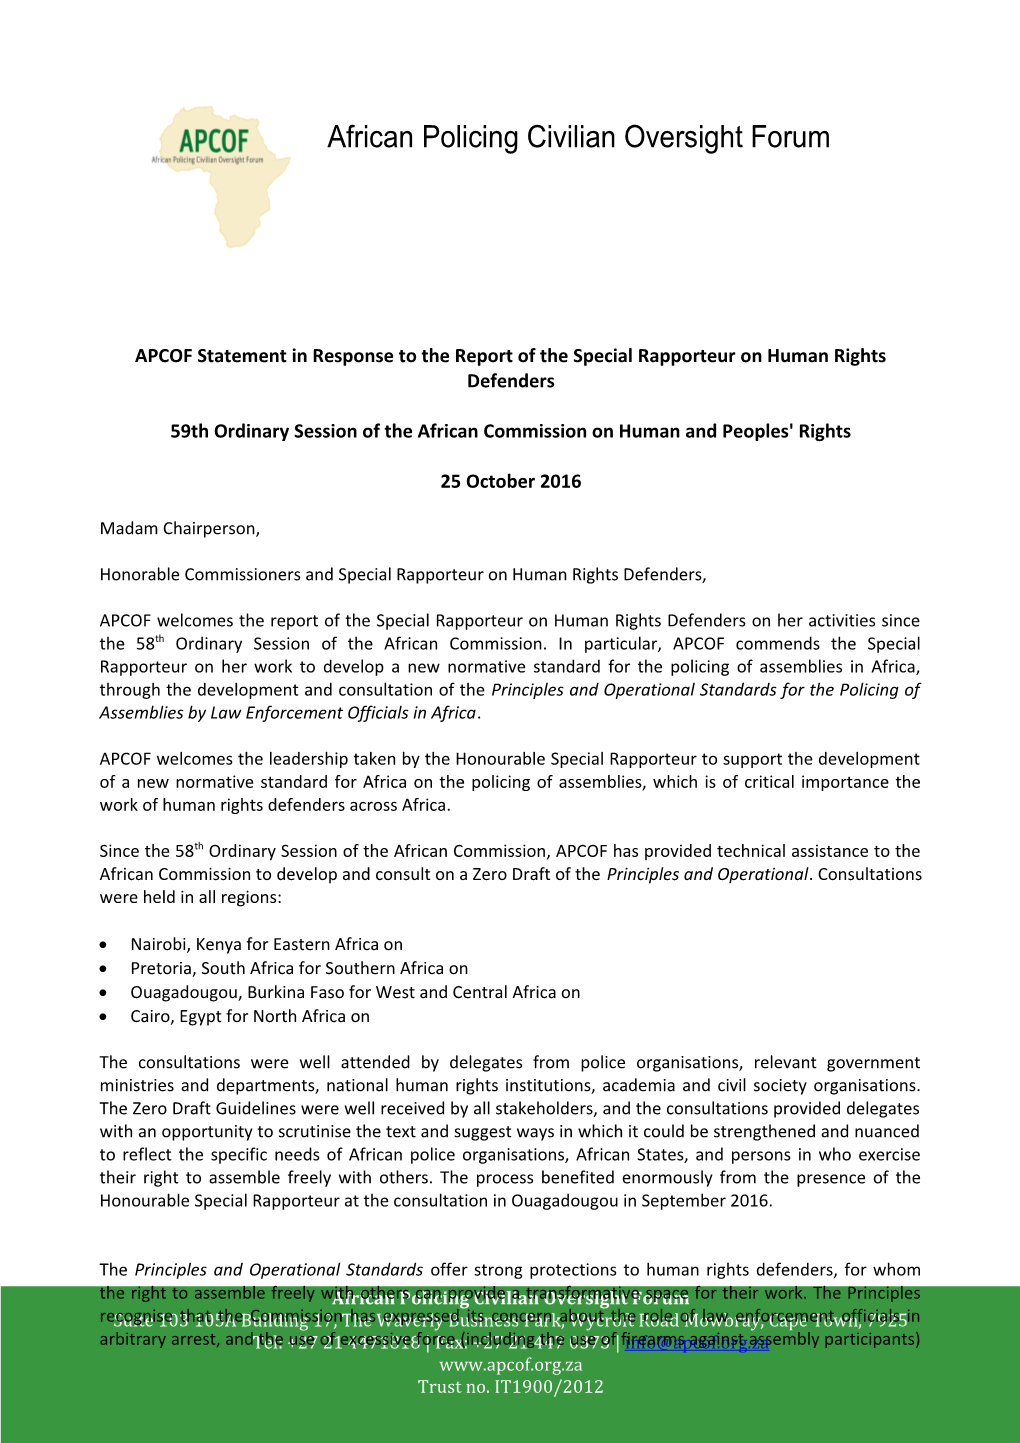 APCOF Statement in Response to the Report of the Special Rapporteur on Human Rights Defenders